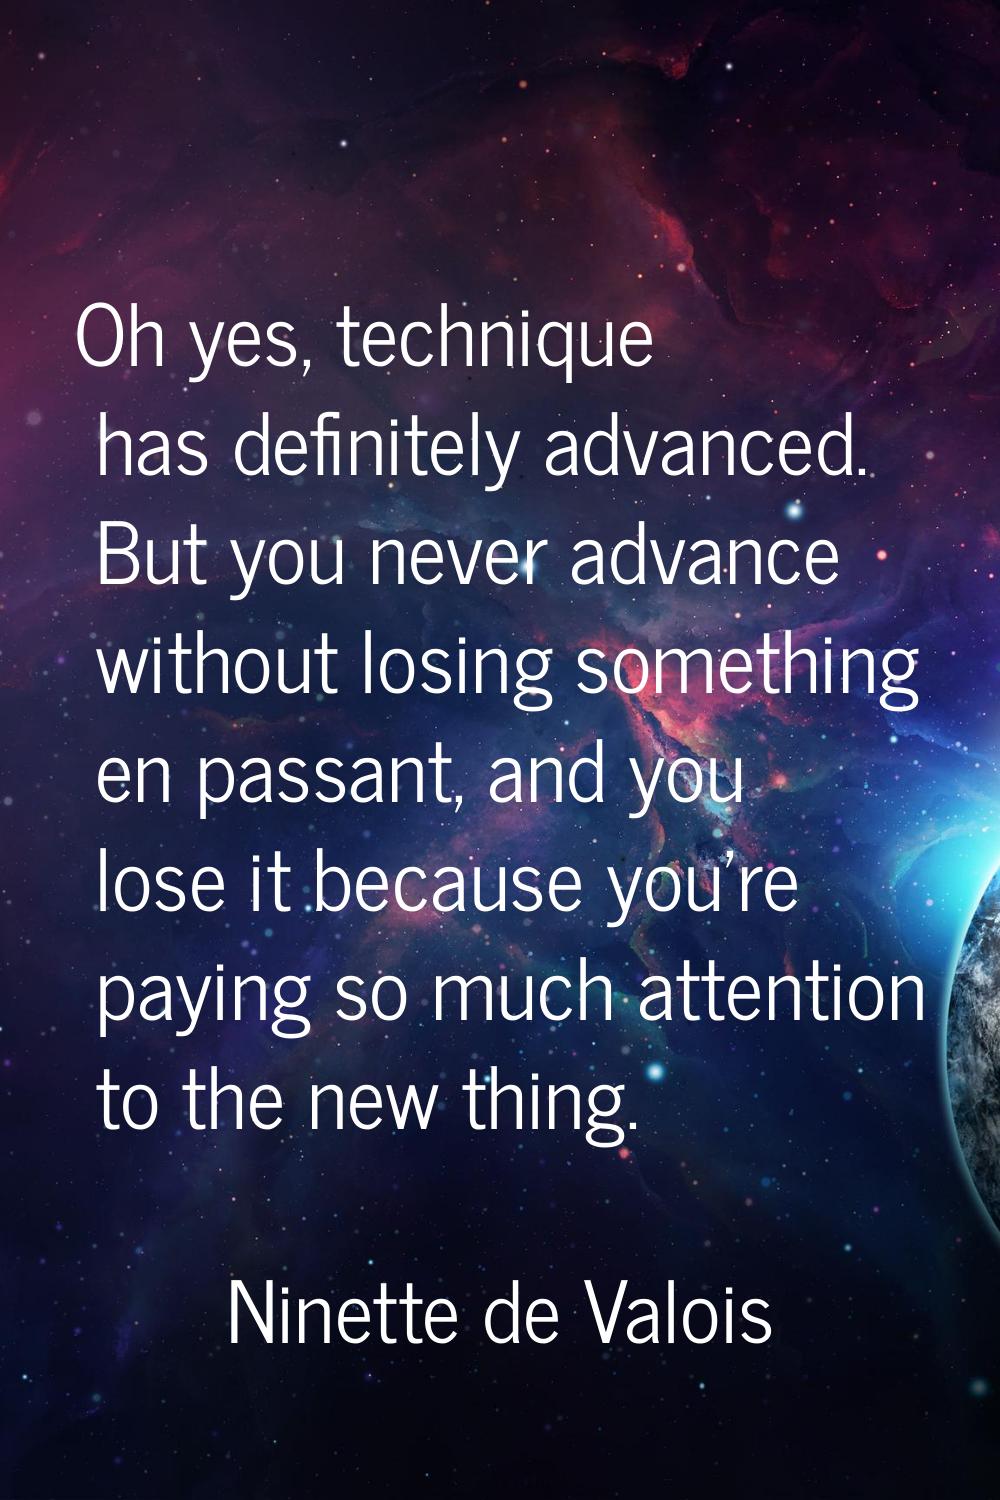 Oh yes, technique has definitely advanced. But you never advance without losing something en passan